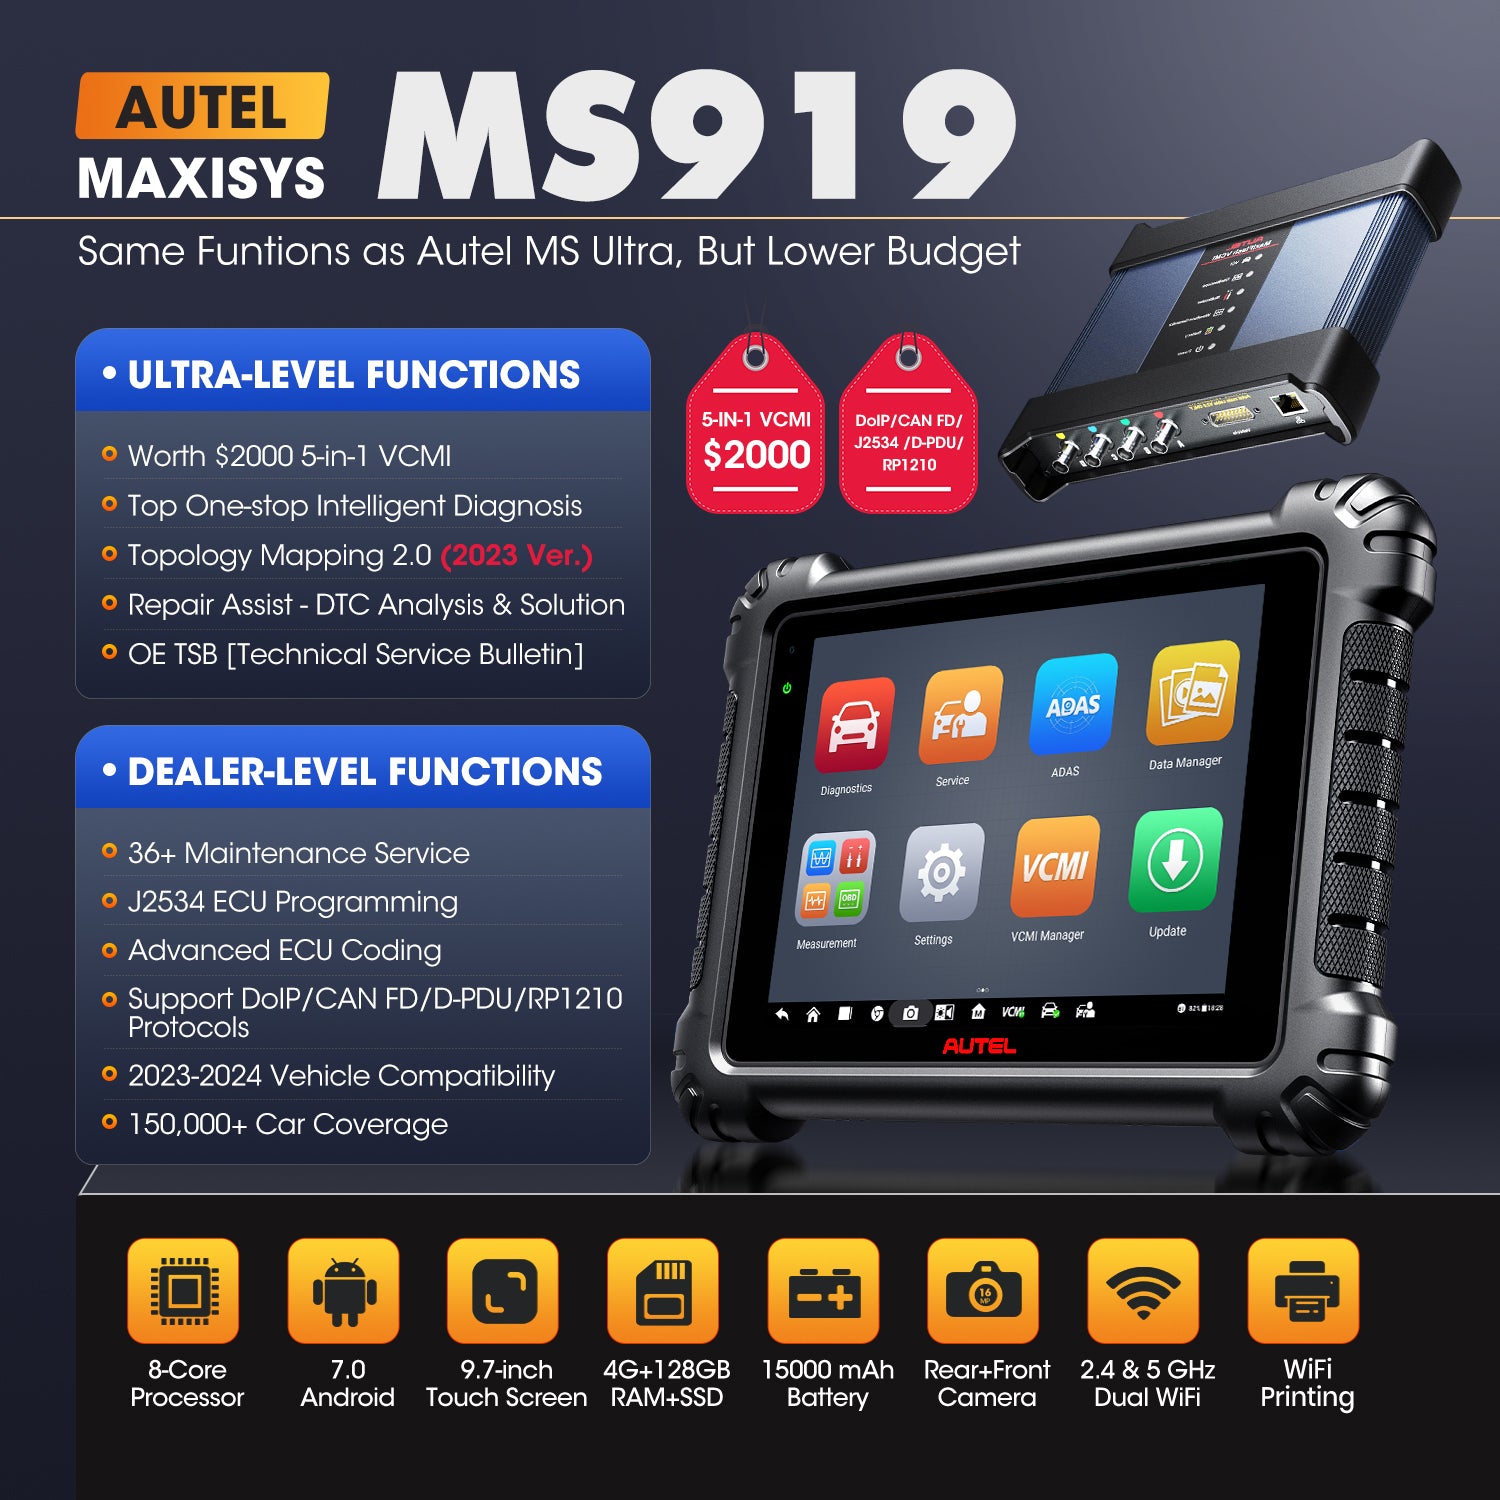 Autel MaxiSys MS919 features